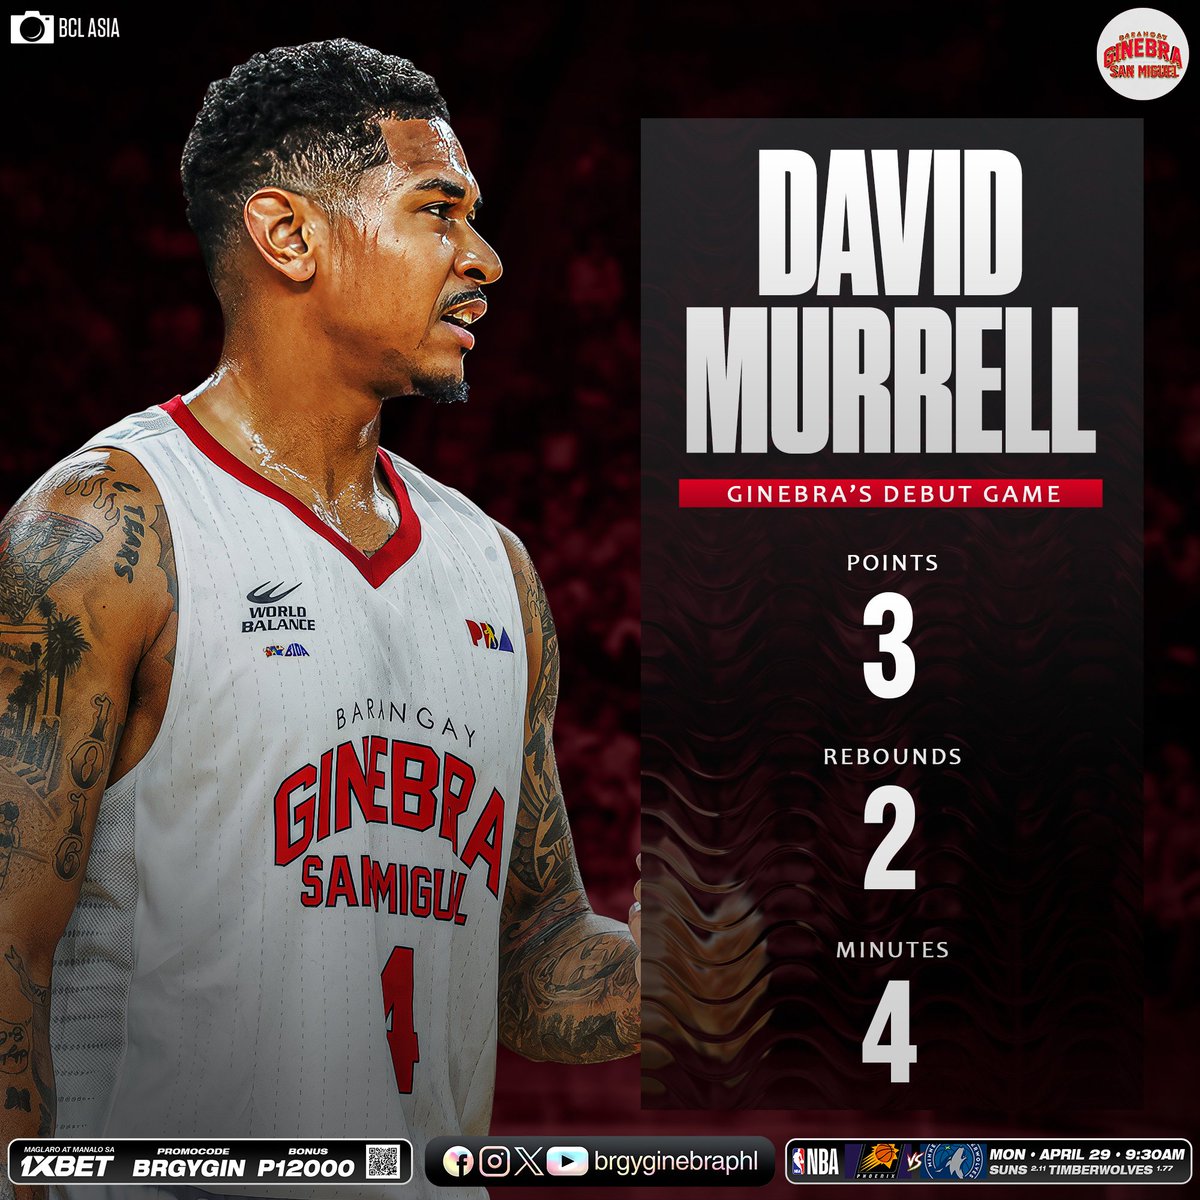 Would you like to see David Murrell become a regular part of our team’s rotation?